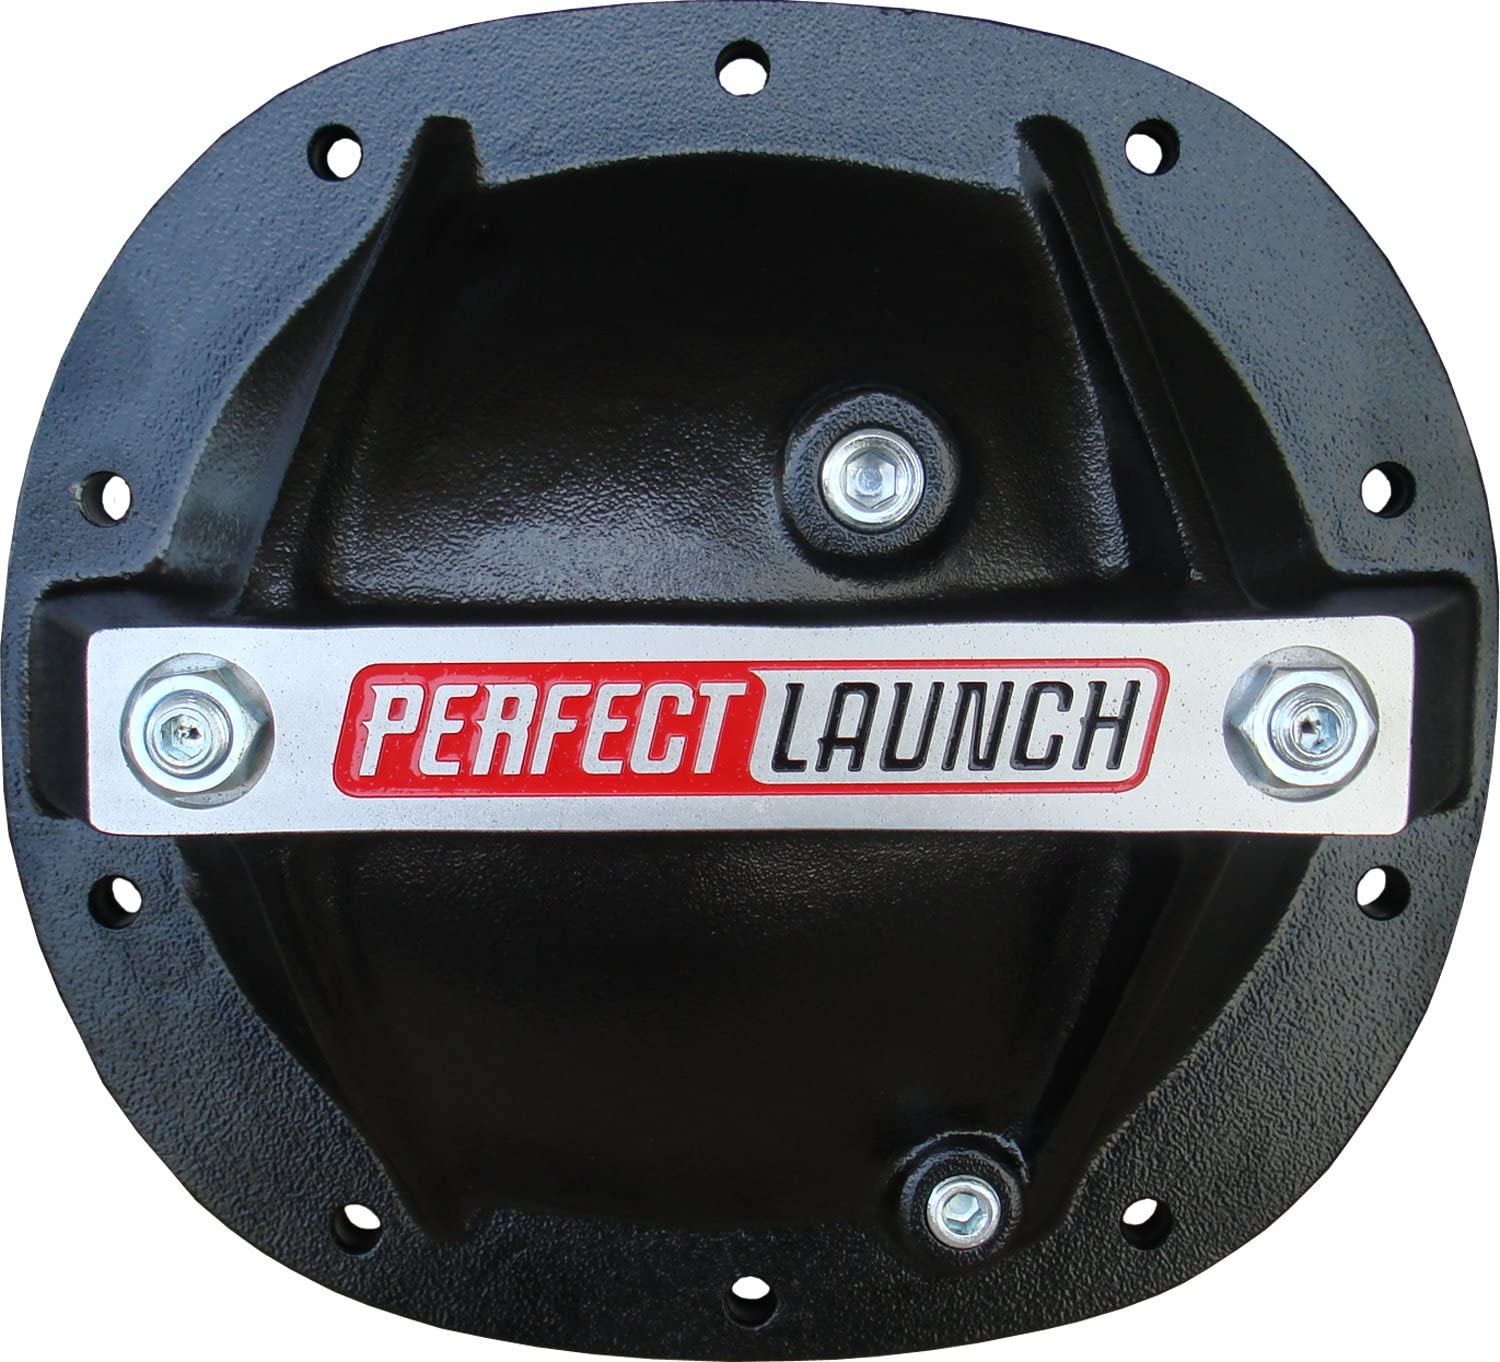 Proform 66667 Black Aluminum Differential Cover with Perfect Launch Logo and Bearing Cap Stabilizer Bolts for GM